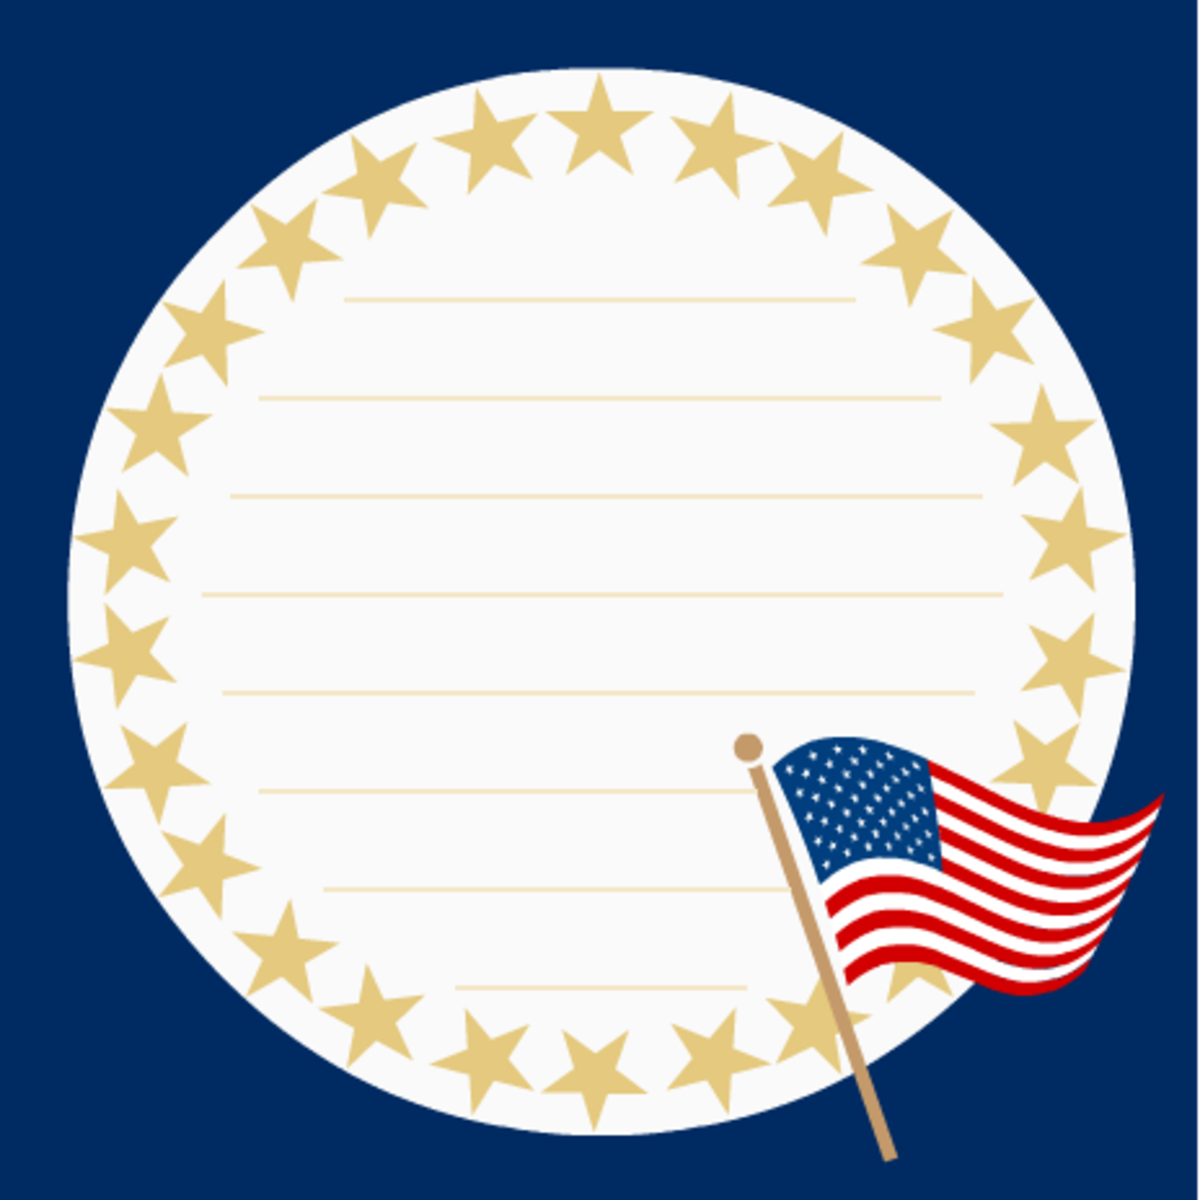 Please scroll down to see all the patriotic and military scrapbook supplies